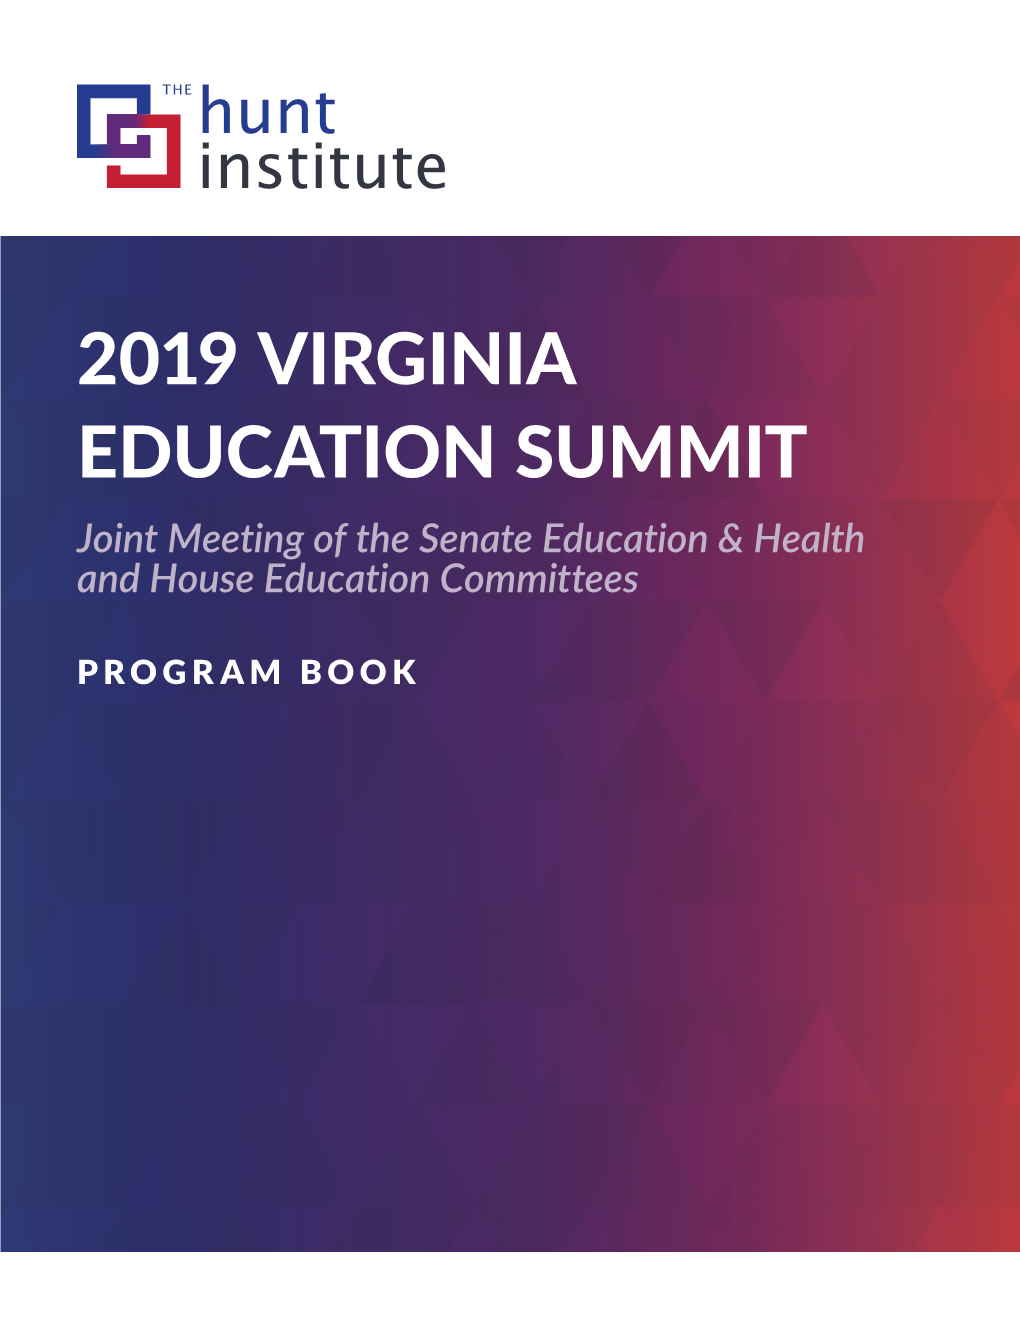 2019 VIRGINIA EDUCATION SUMMIT Joint Meeting of the Senate Education & Health and House Education Committees